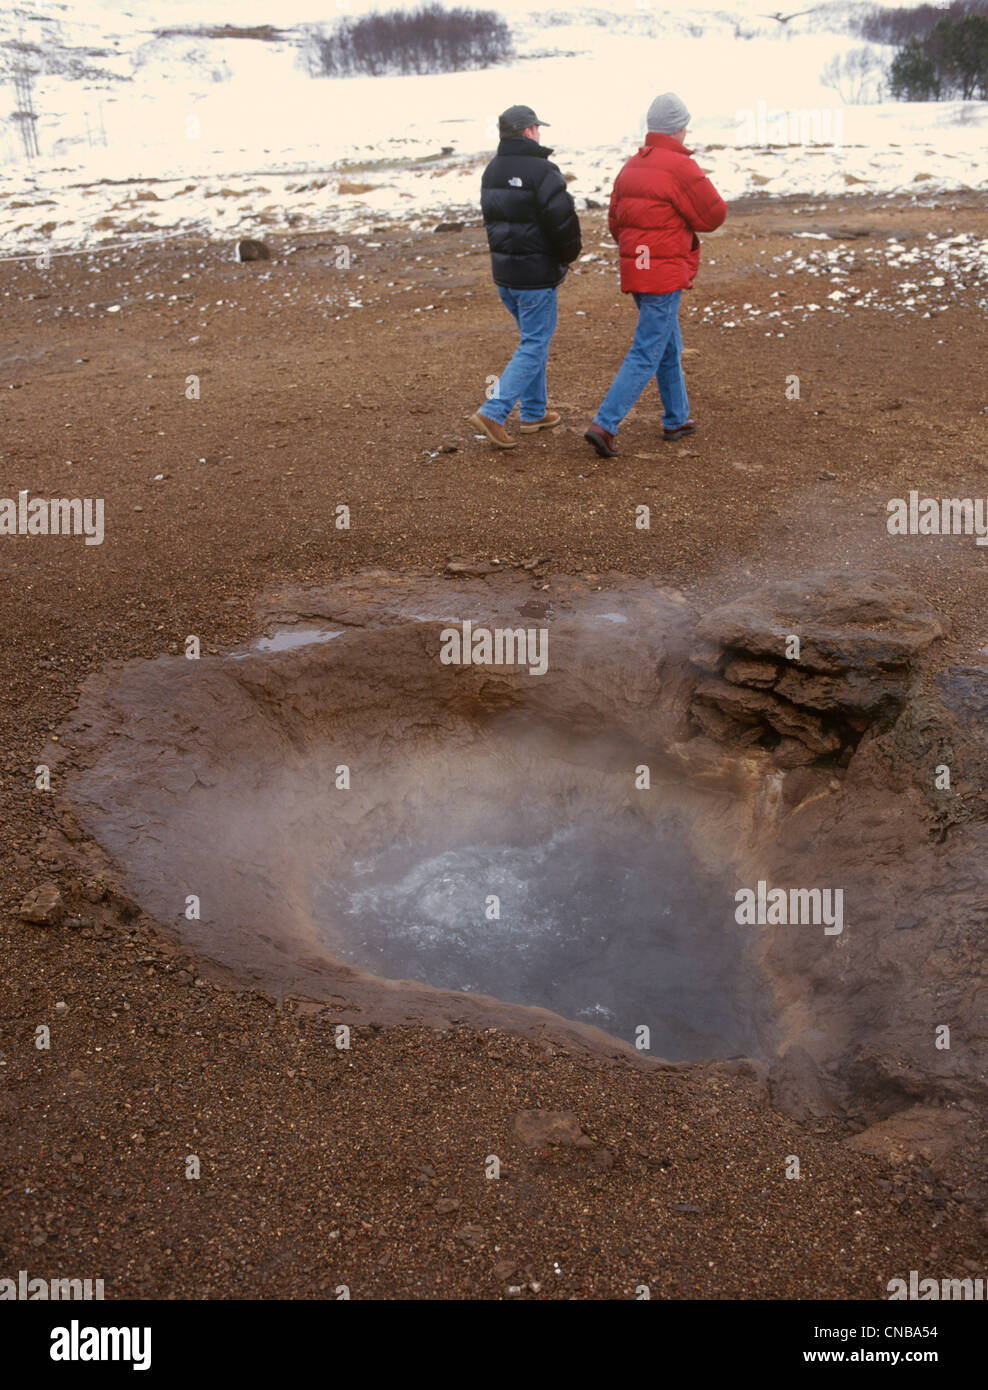 Iceland Geysir Blue coloured hot spring steaming in the cold Stock Photo